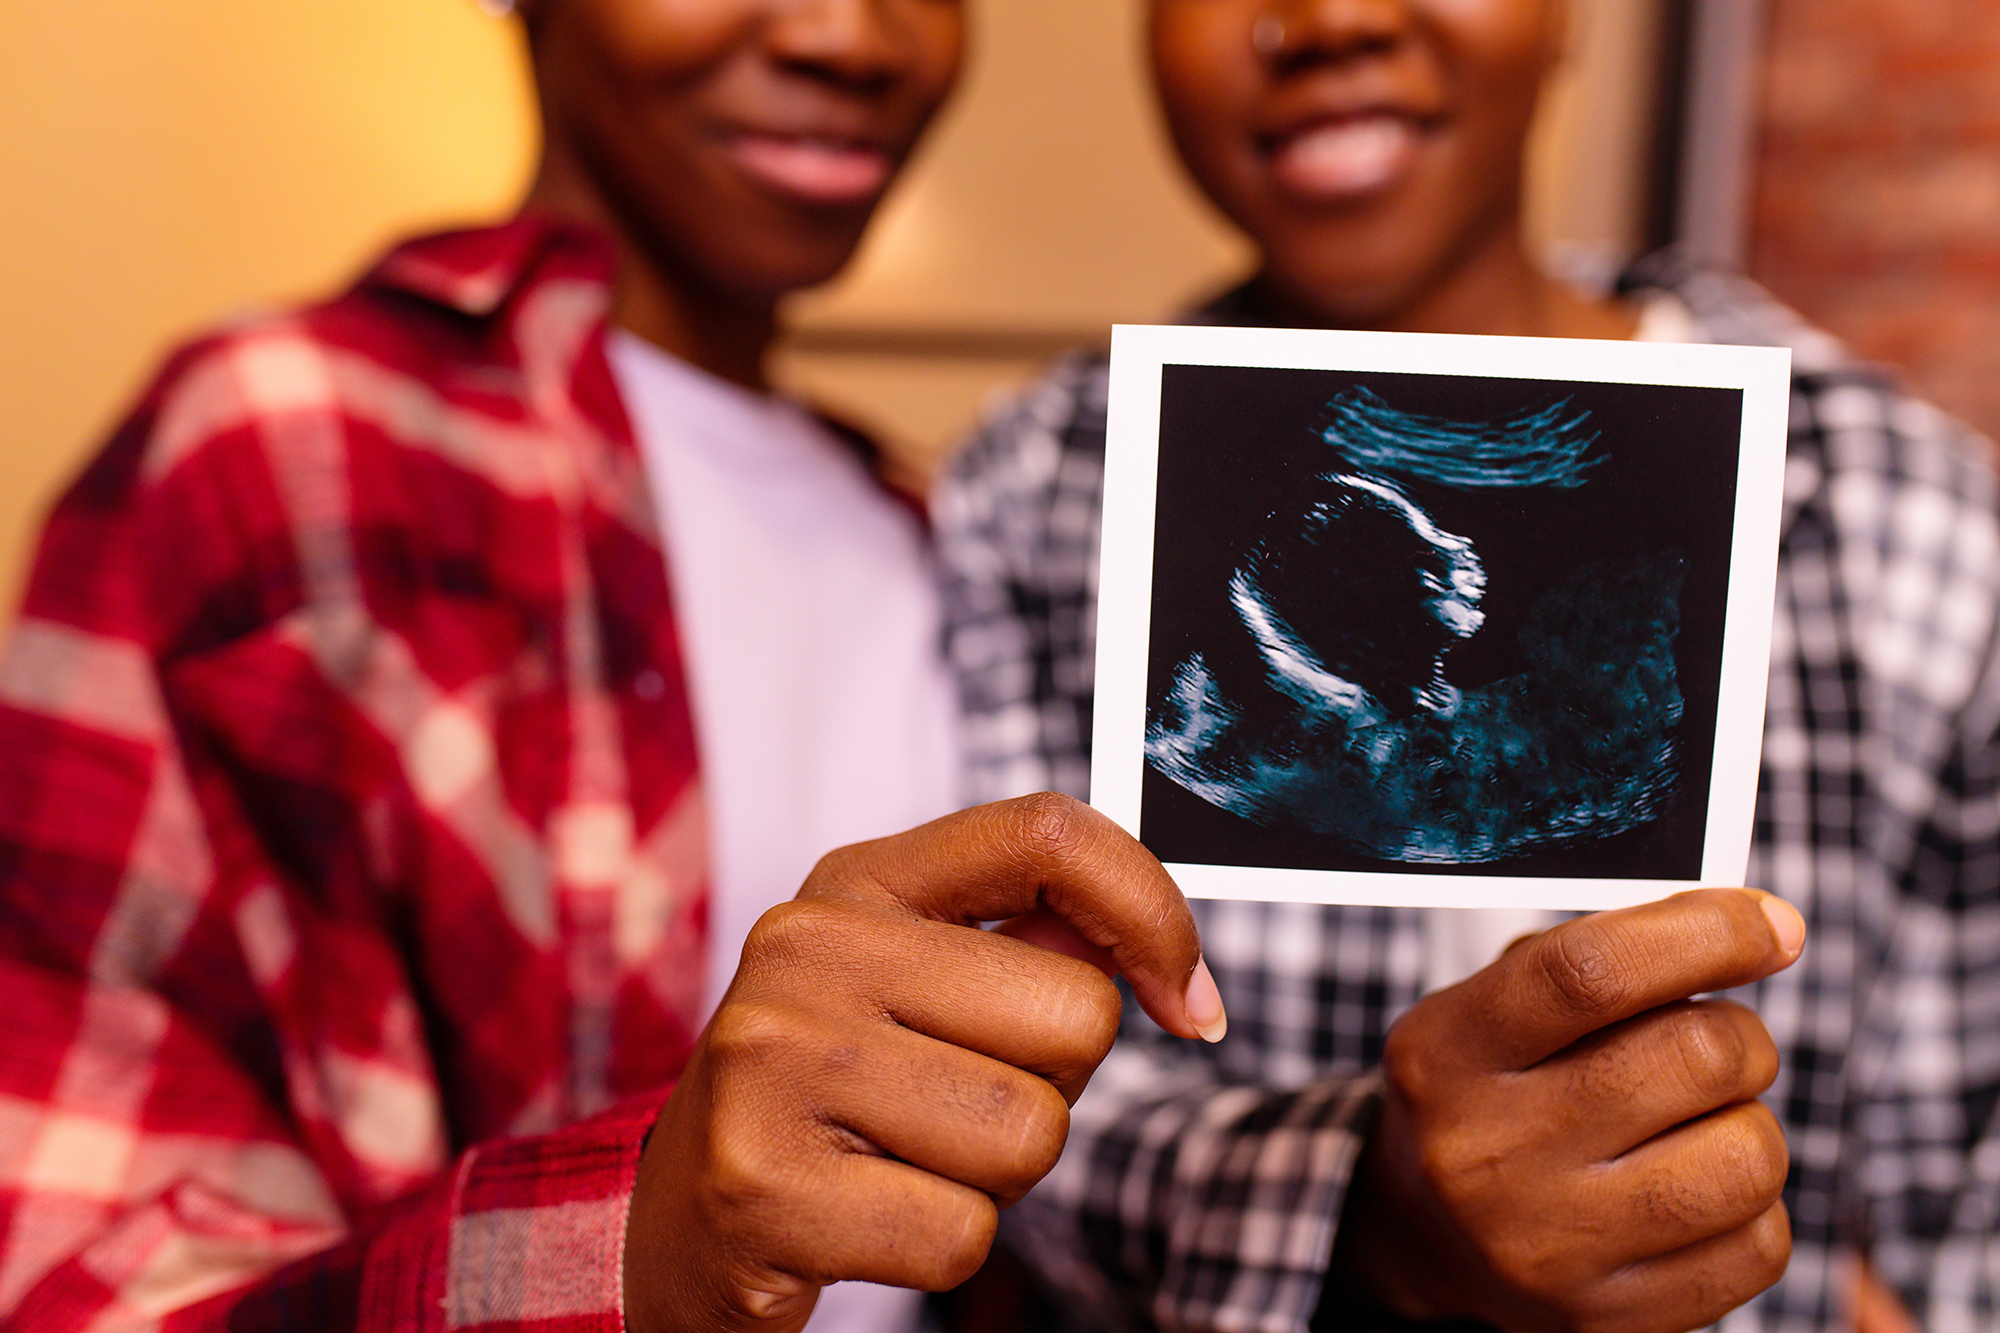 "Two women stand next to each other in the background holding up an ultrasound photo together"